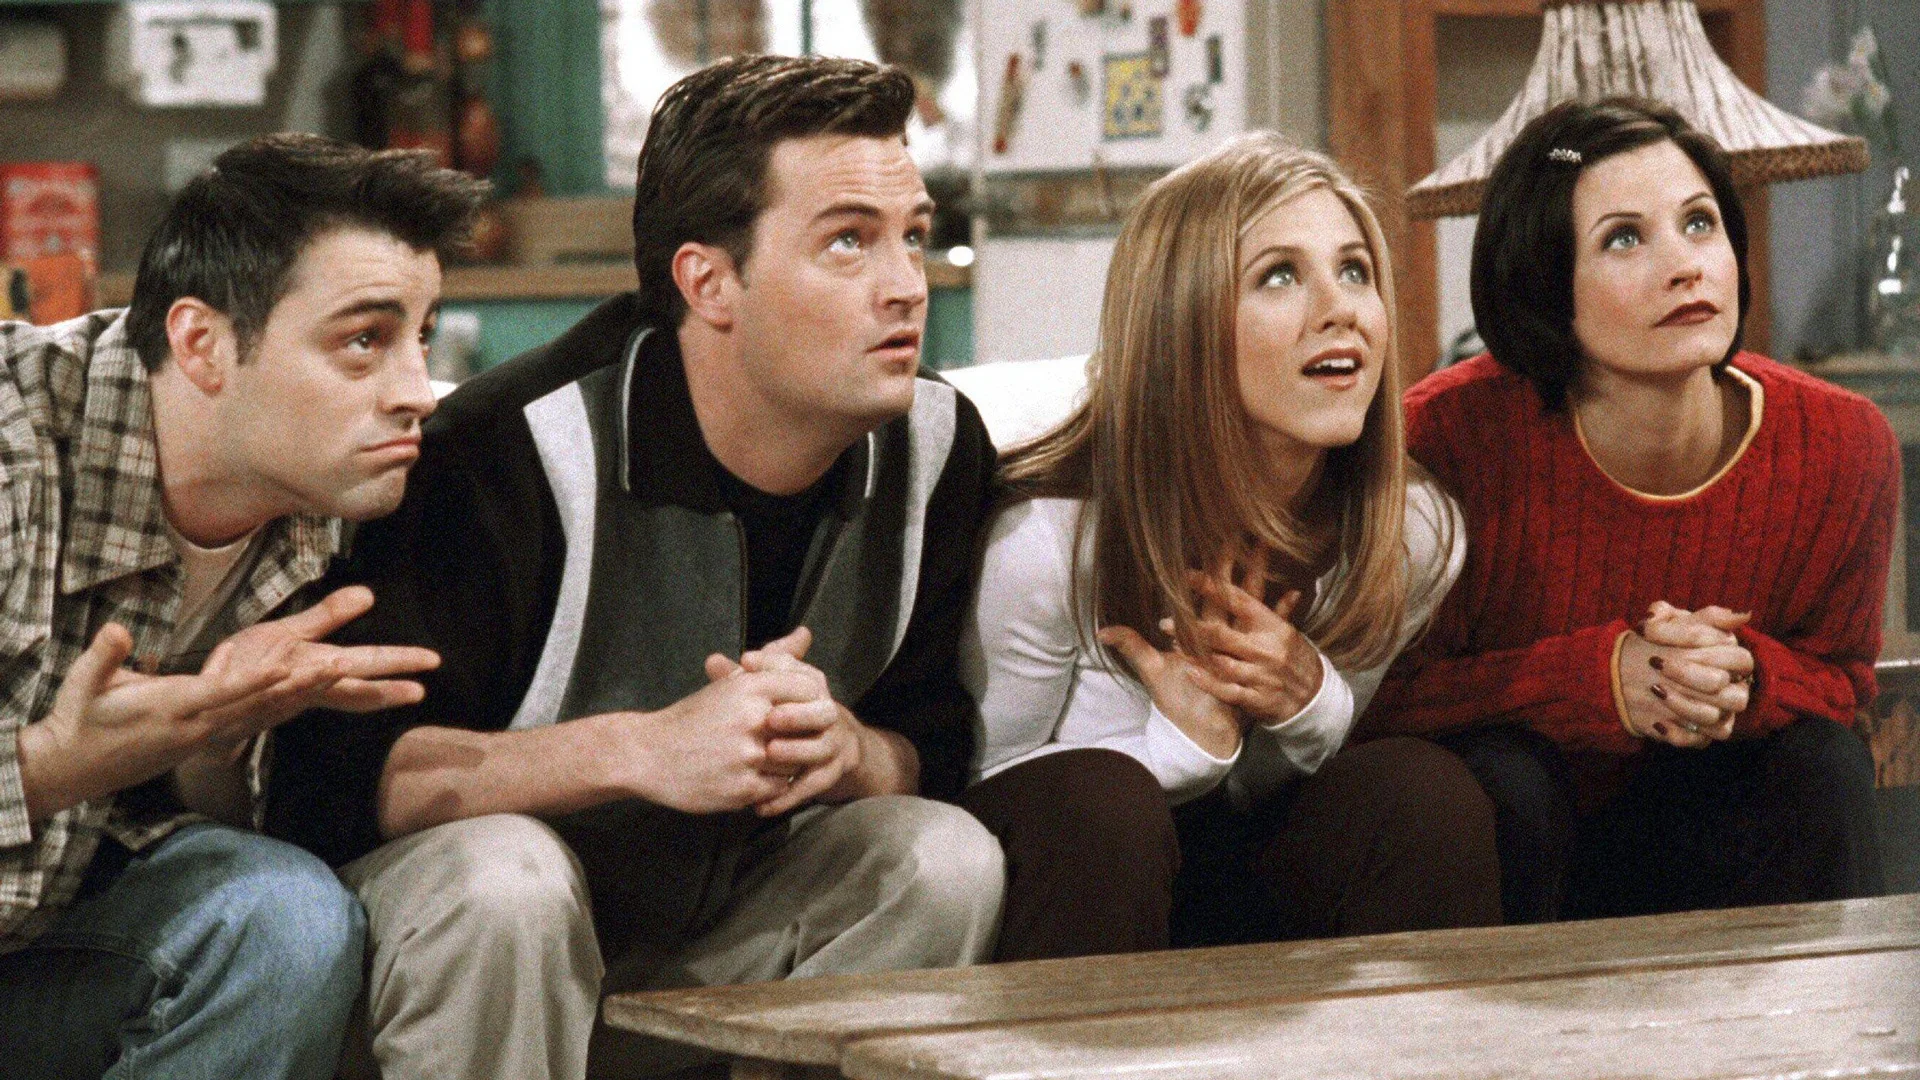 A photograph of the Friends characters Joey, Chandler, Rachel and Monika sat on a sofa looking up at something or someone half surprised.